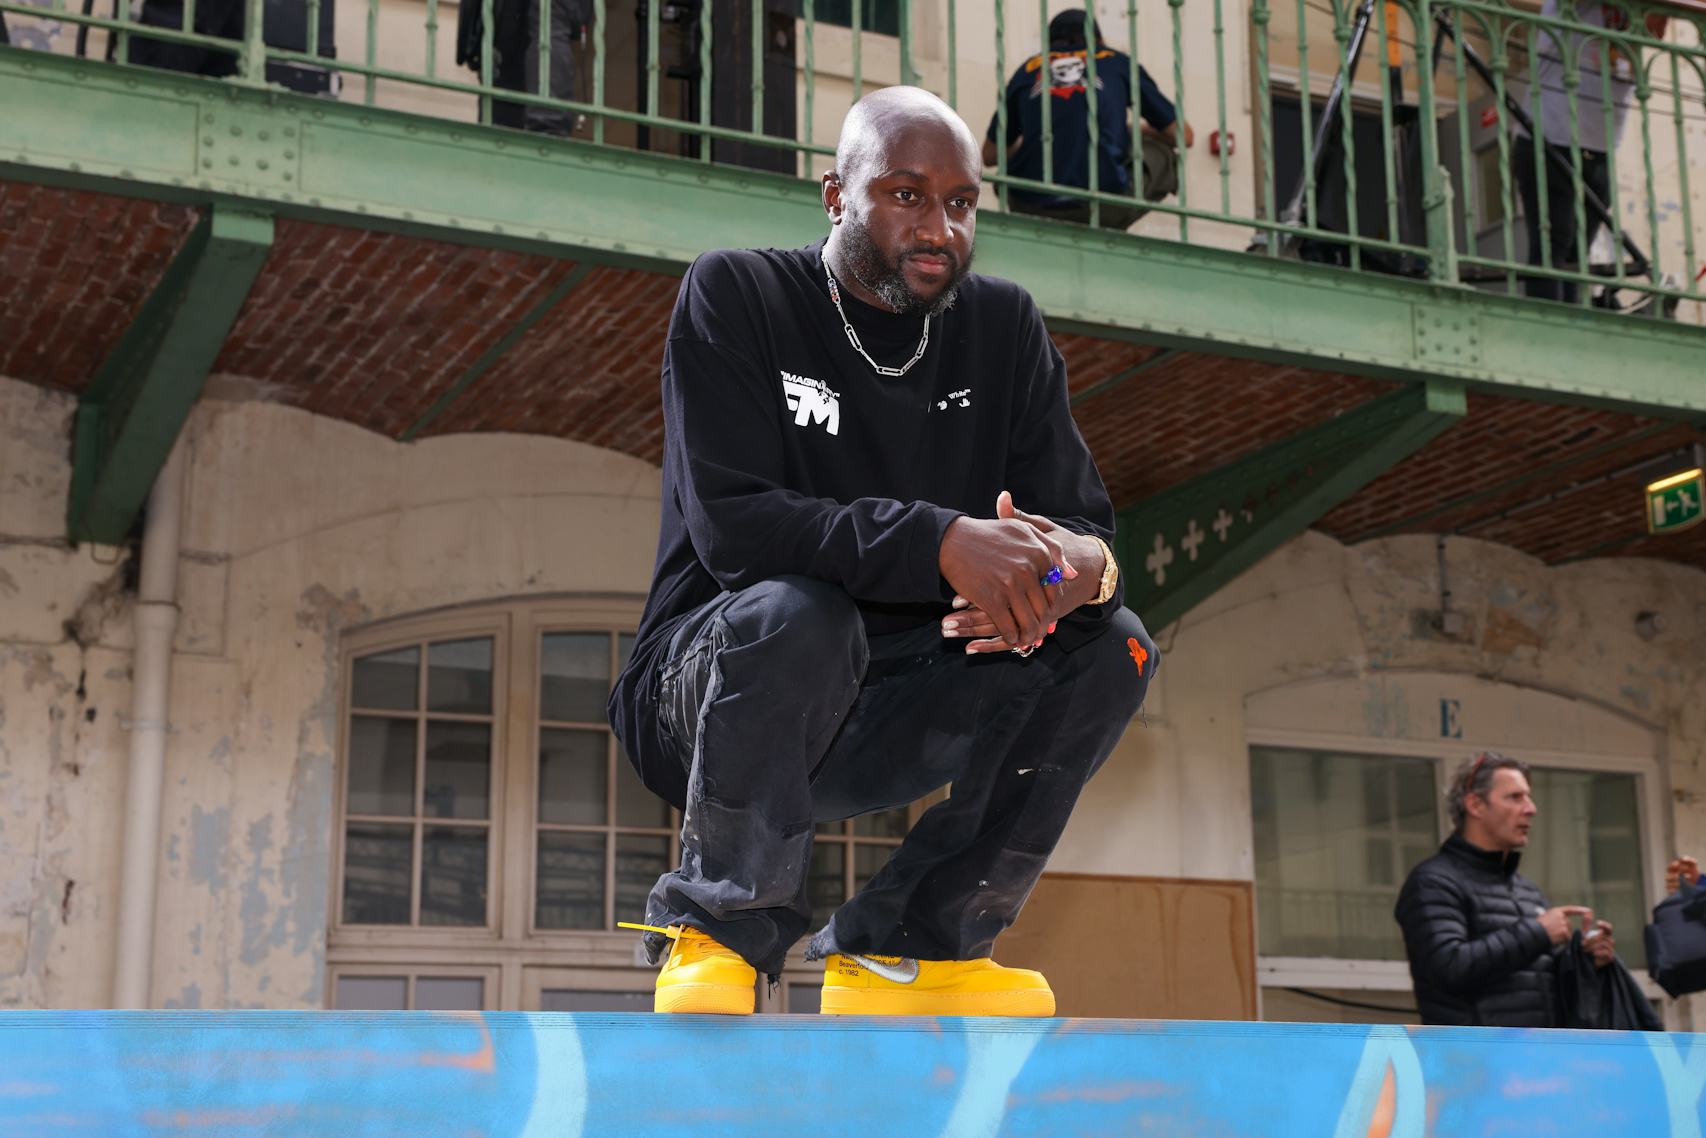 Virgil Abloh's latest collection to be shown as planned in Miami